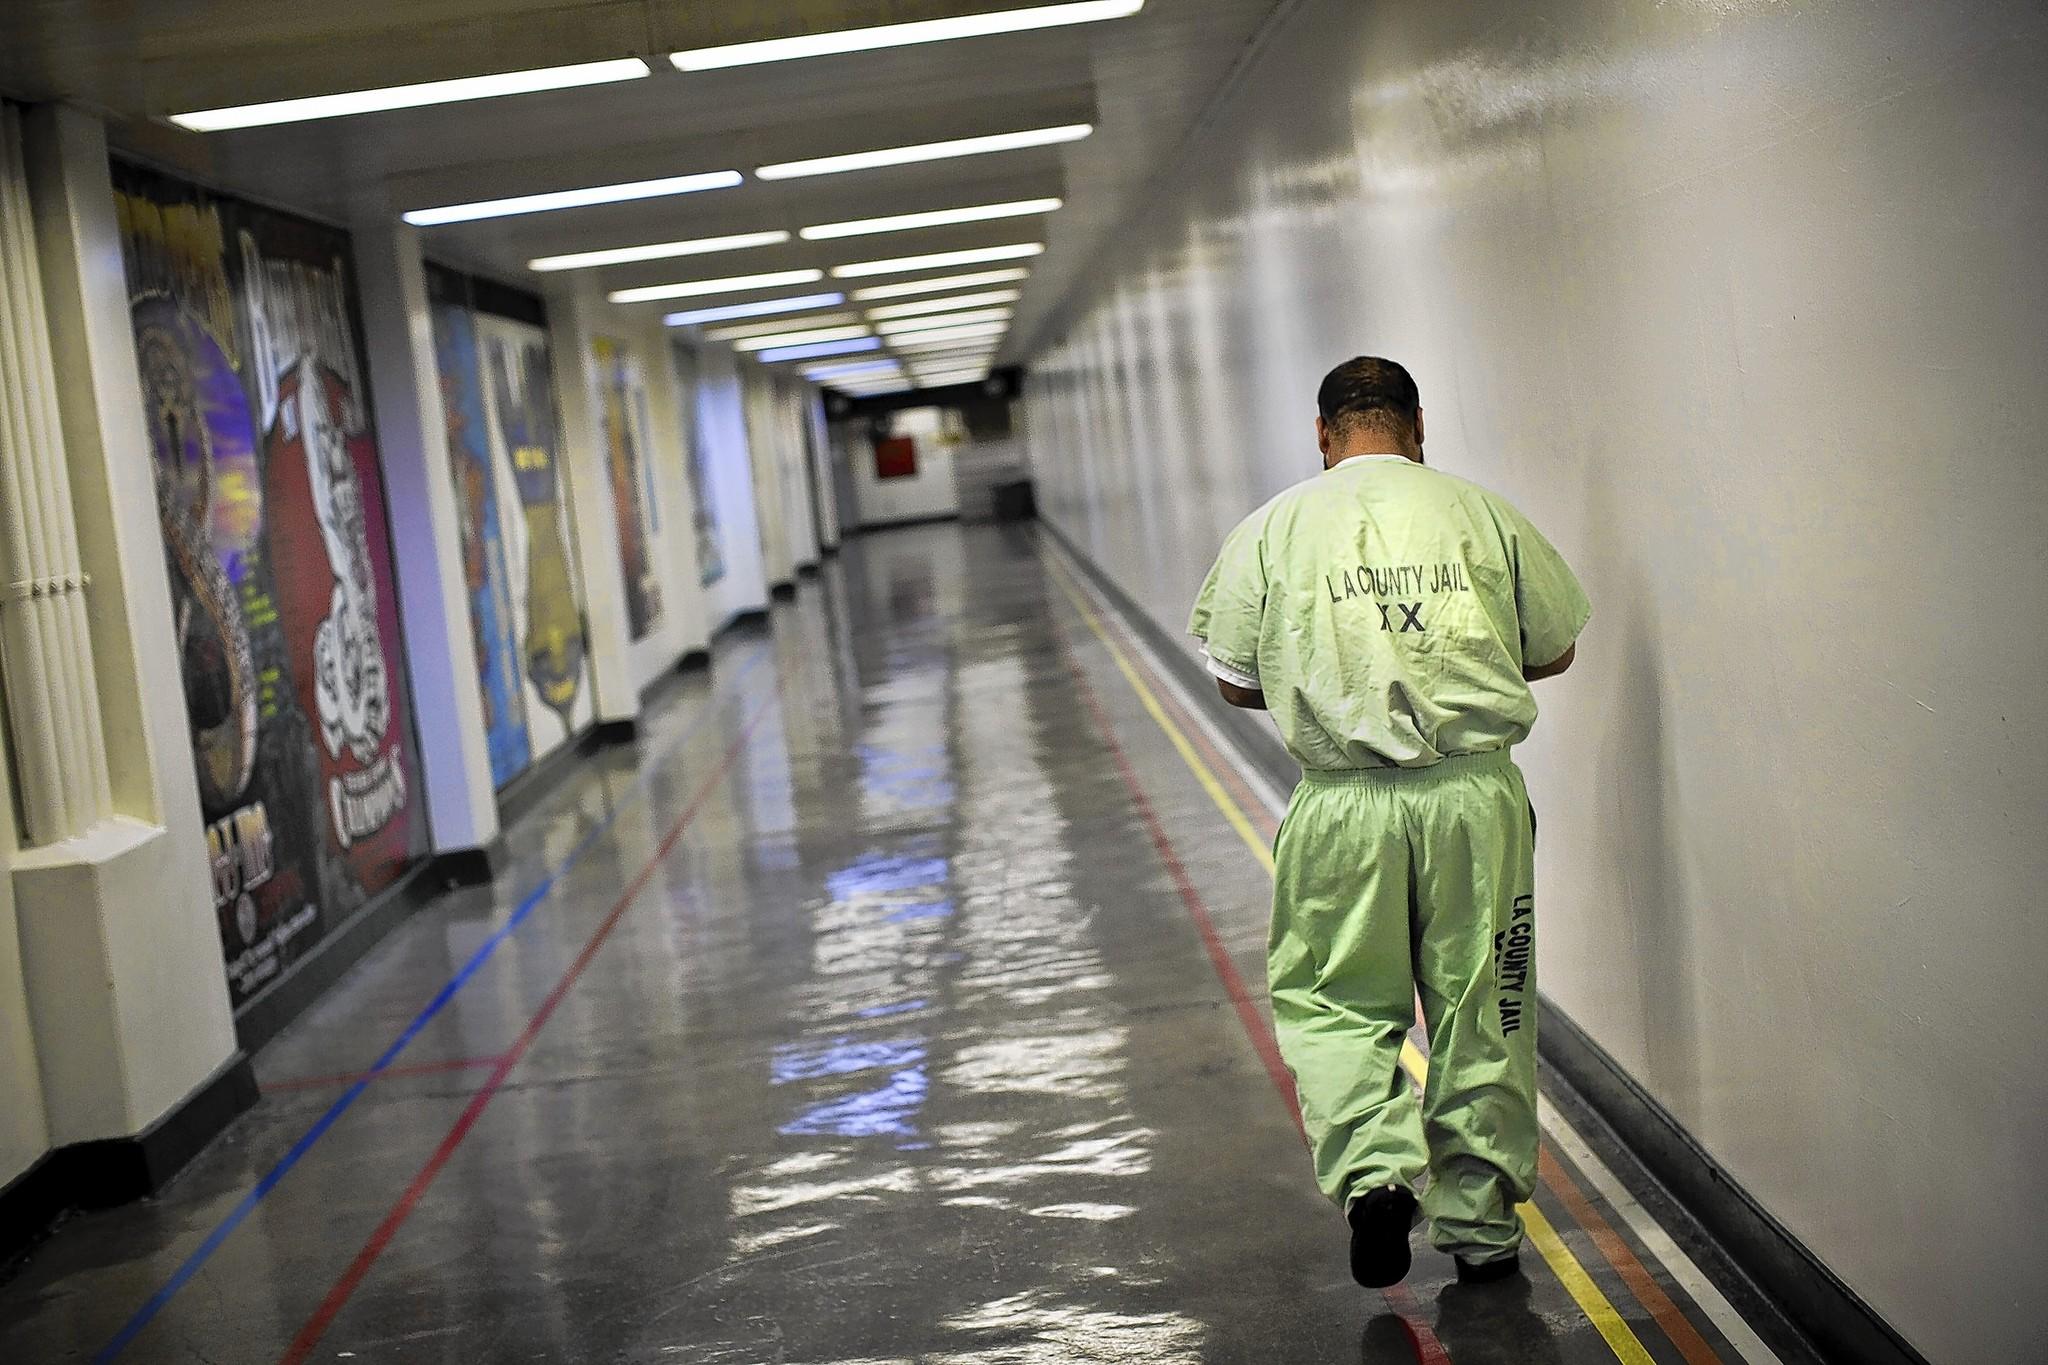 Consultant lays out options for $2-billion L.A. County jail overhaul